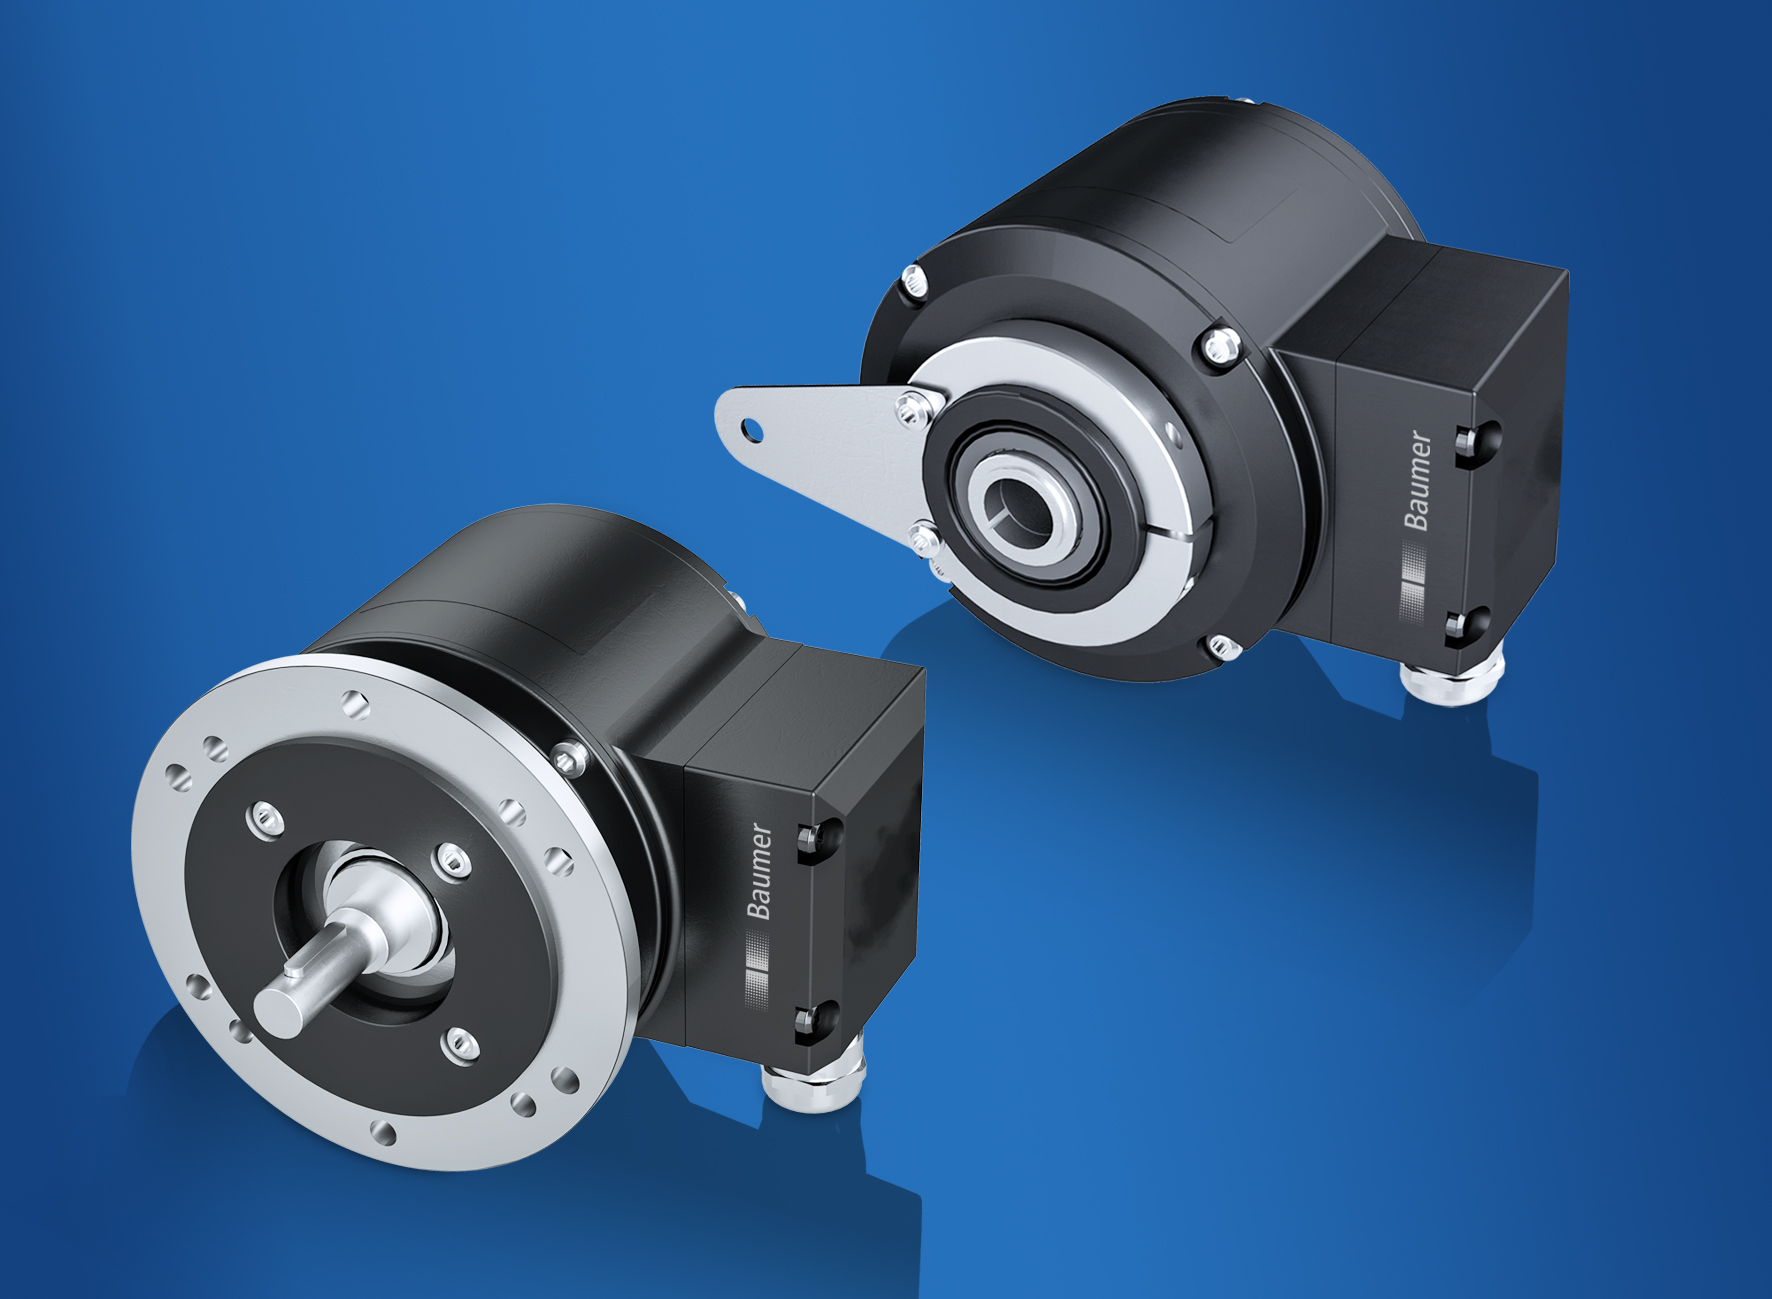 HMG 10 and PMG 10 Encoder Series from Baumer